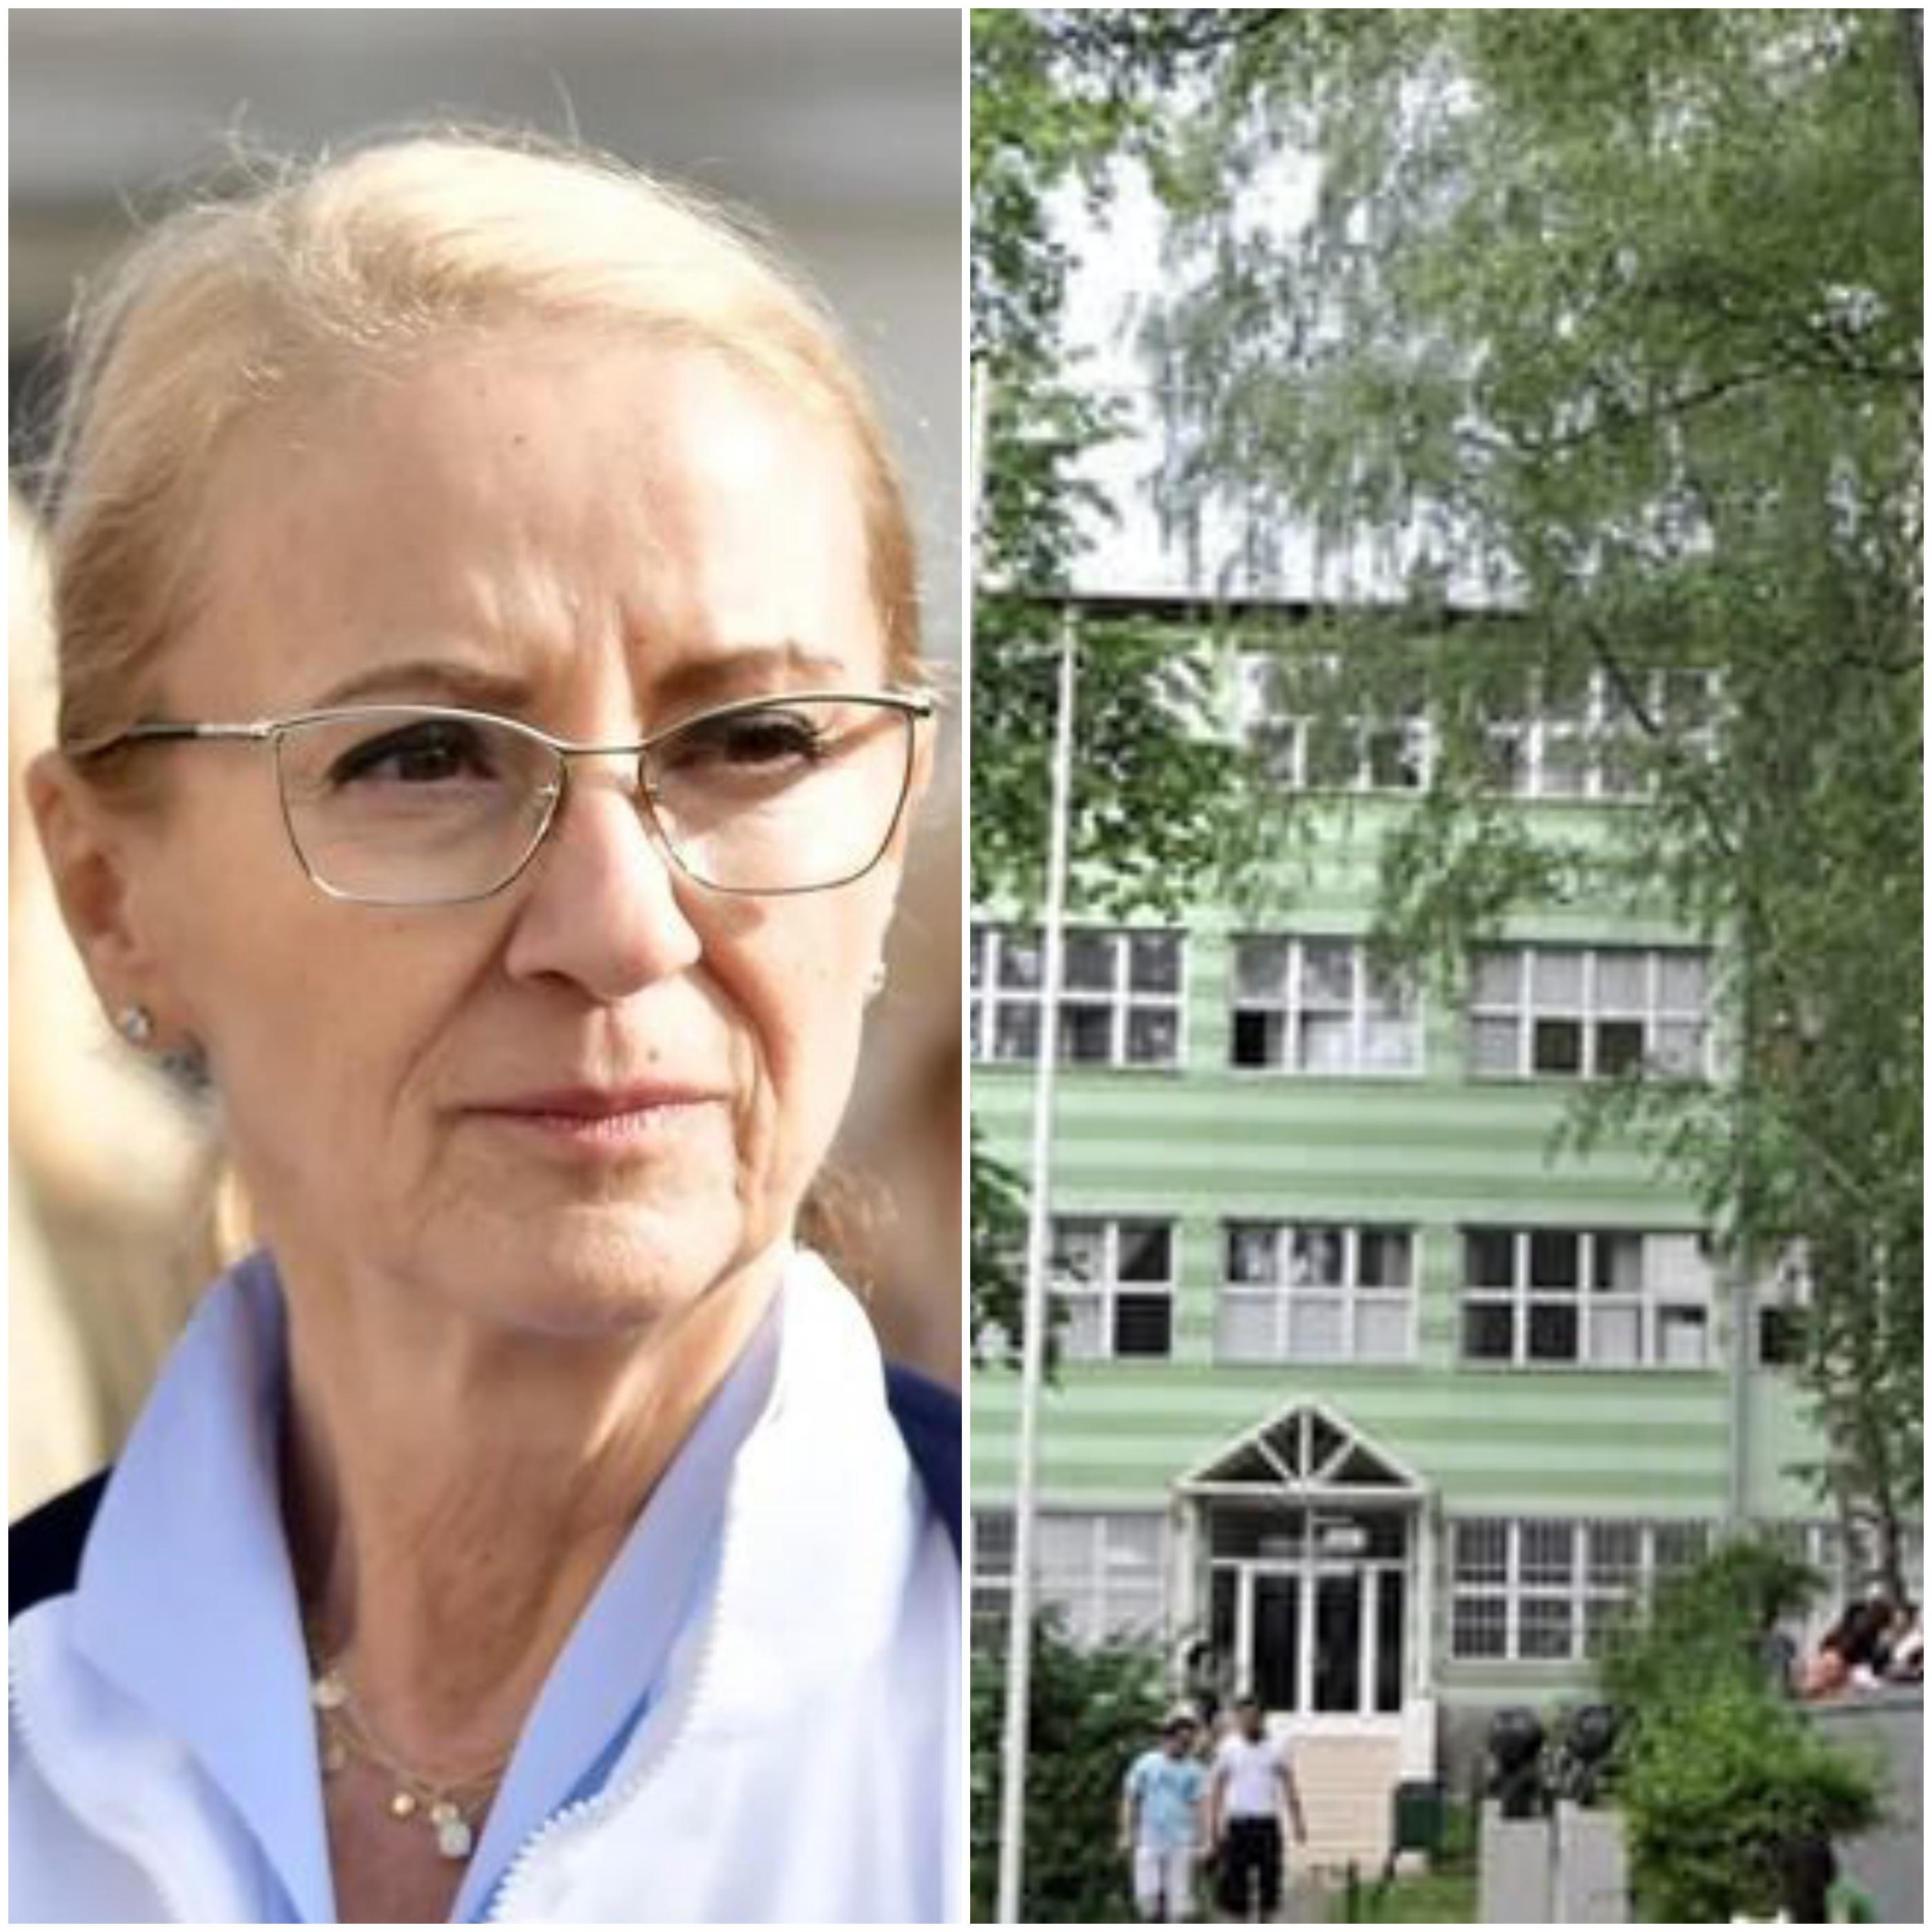 Inspectors entered the Faculty of Medicine, Sebija Izetbegović's diploma is being checked